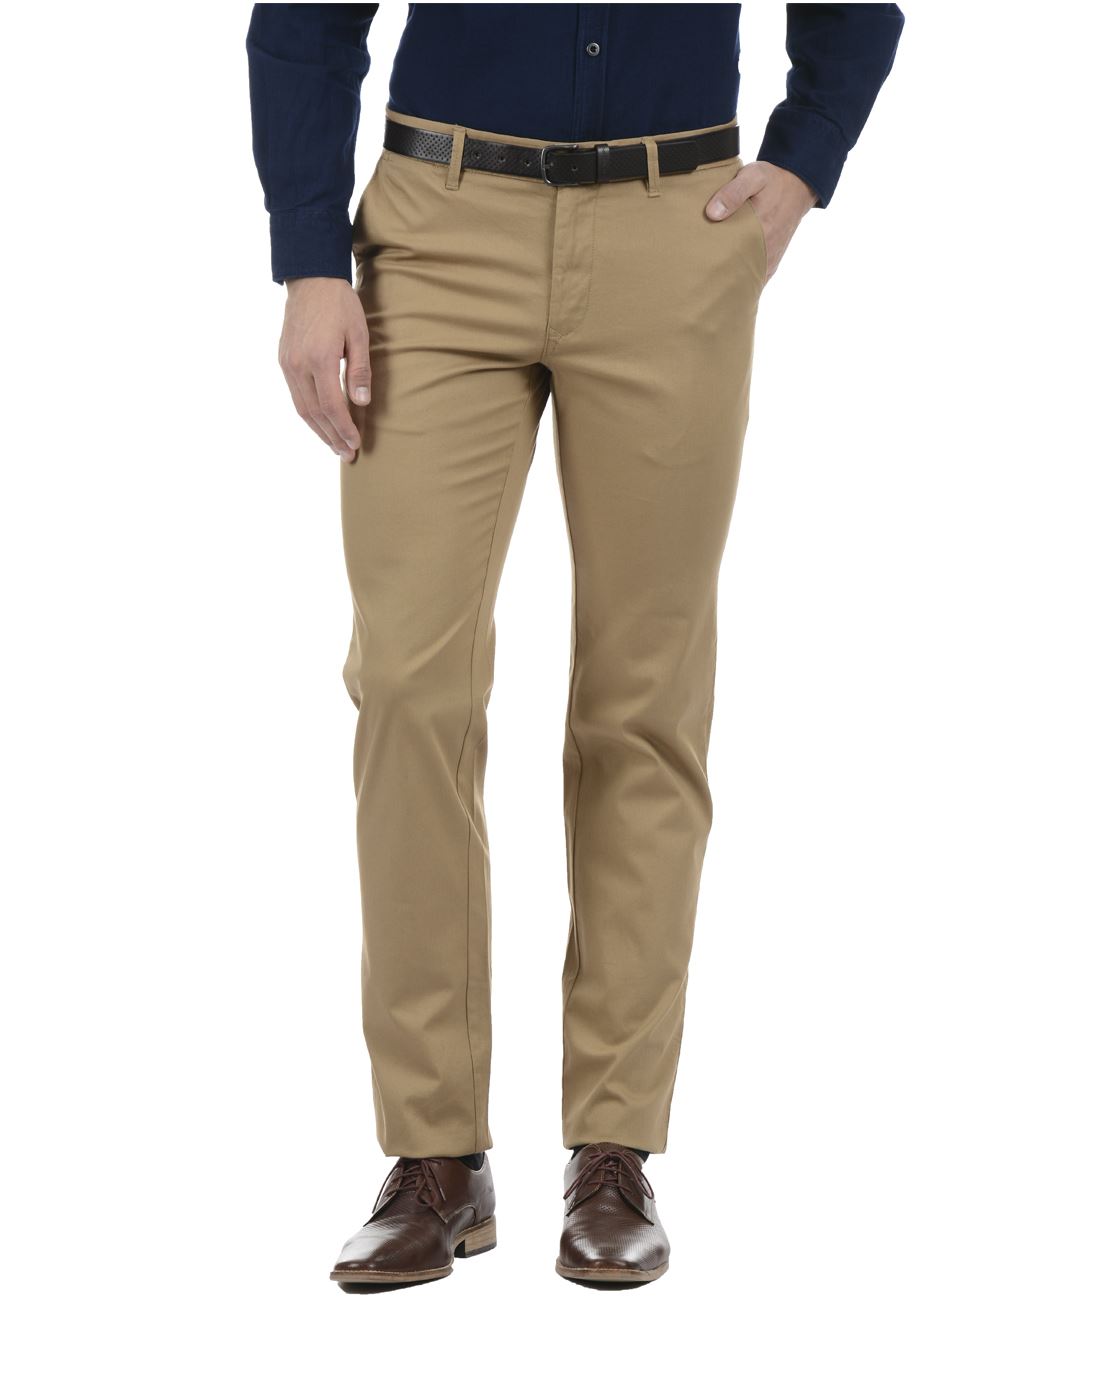 Latest Indian Terrain Formal Trousers & Hight Waist Pants arrivals - Men -  3 products | FASHIOLA INDIA